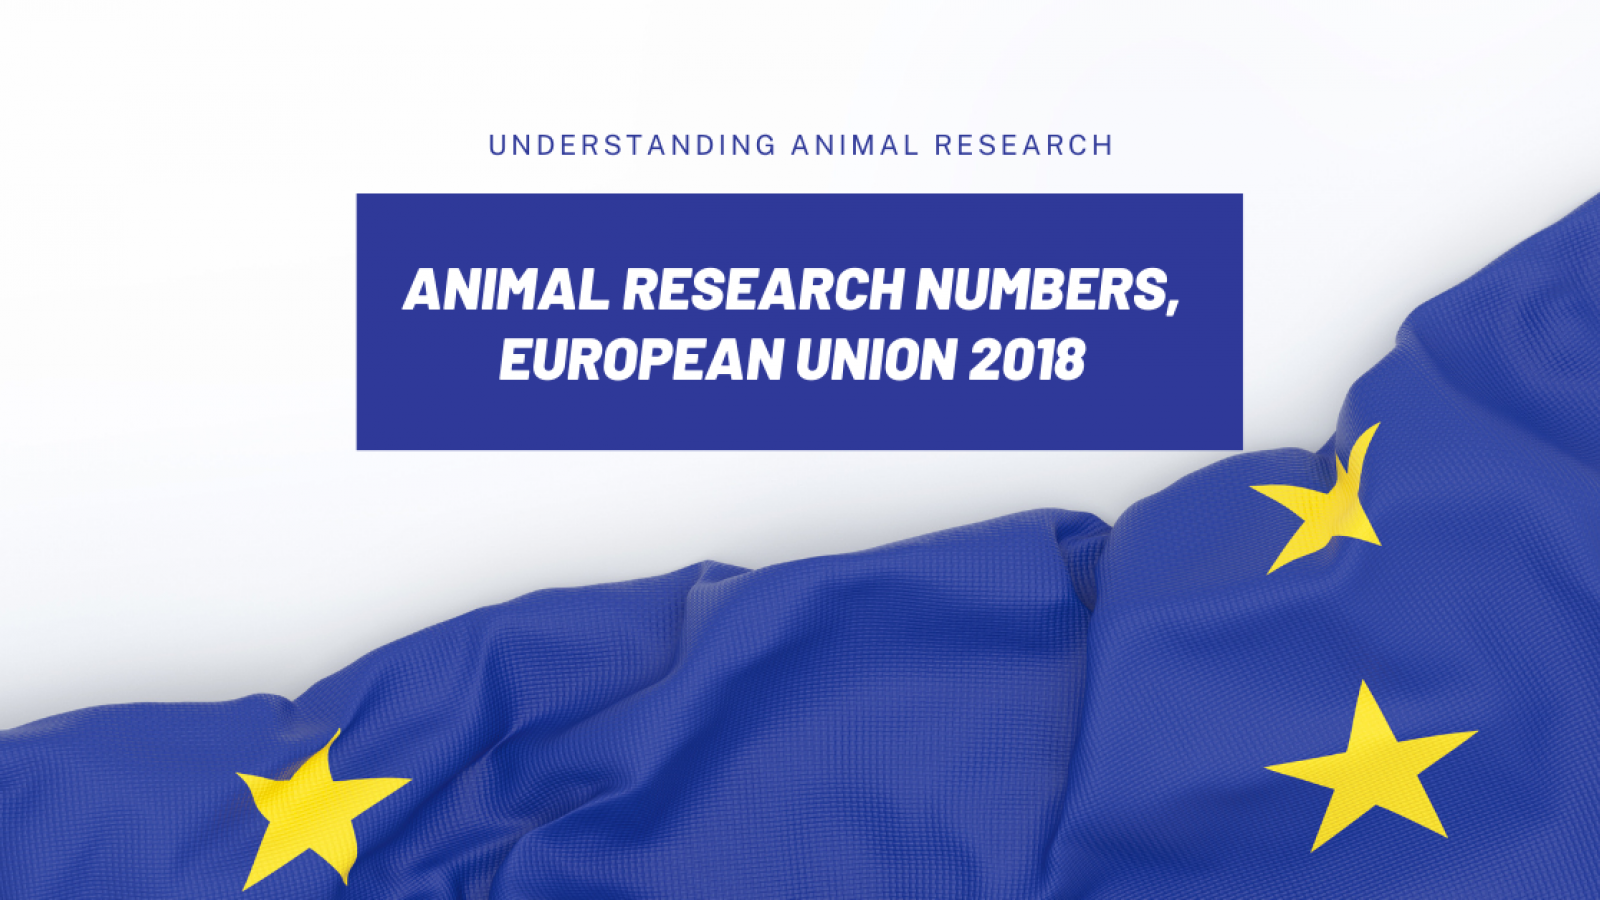 EU-wide animals in research statistics for 2018 released